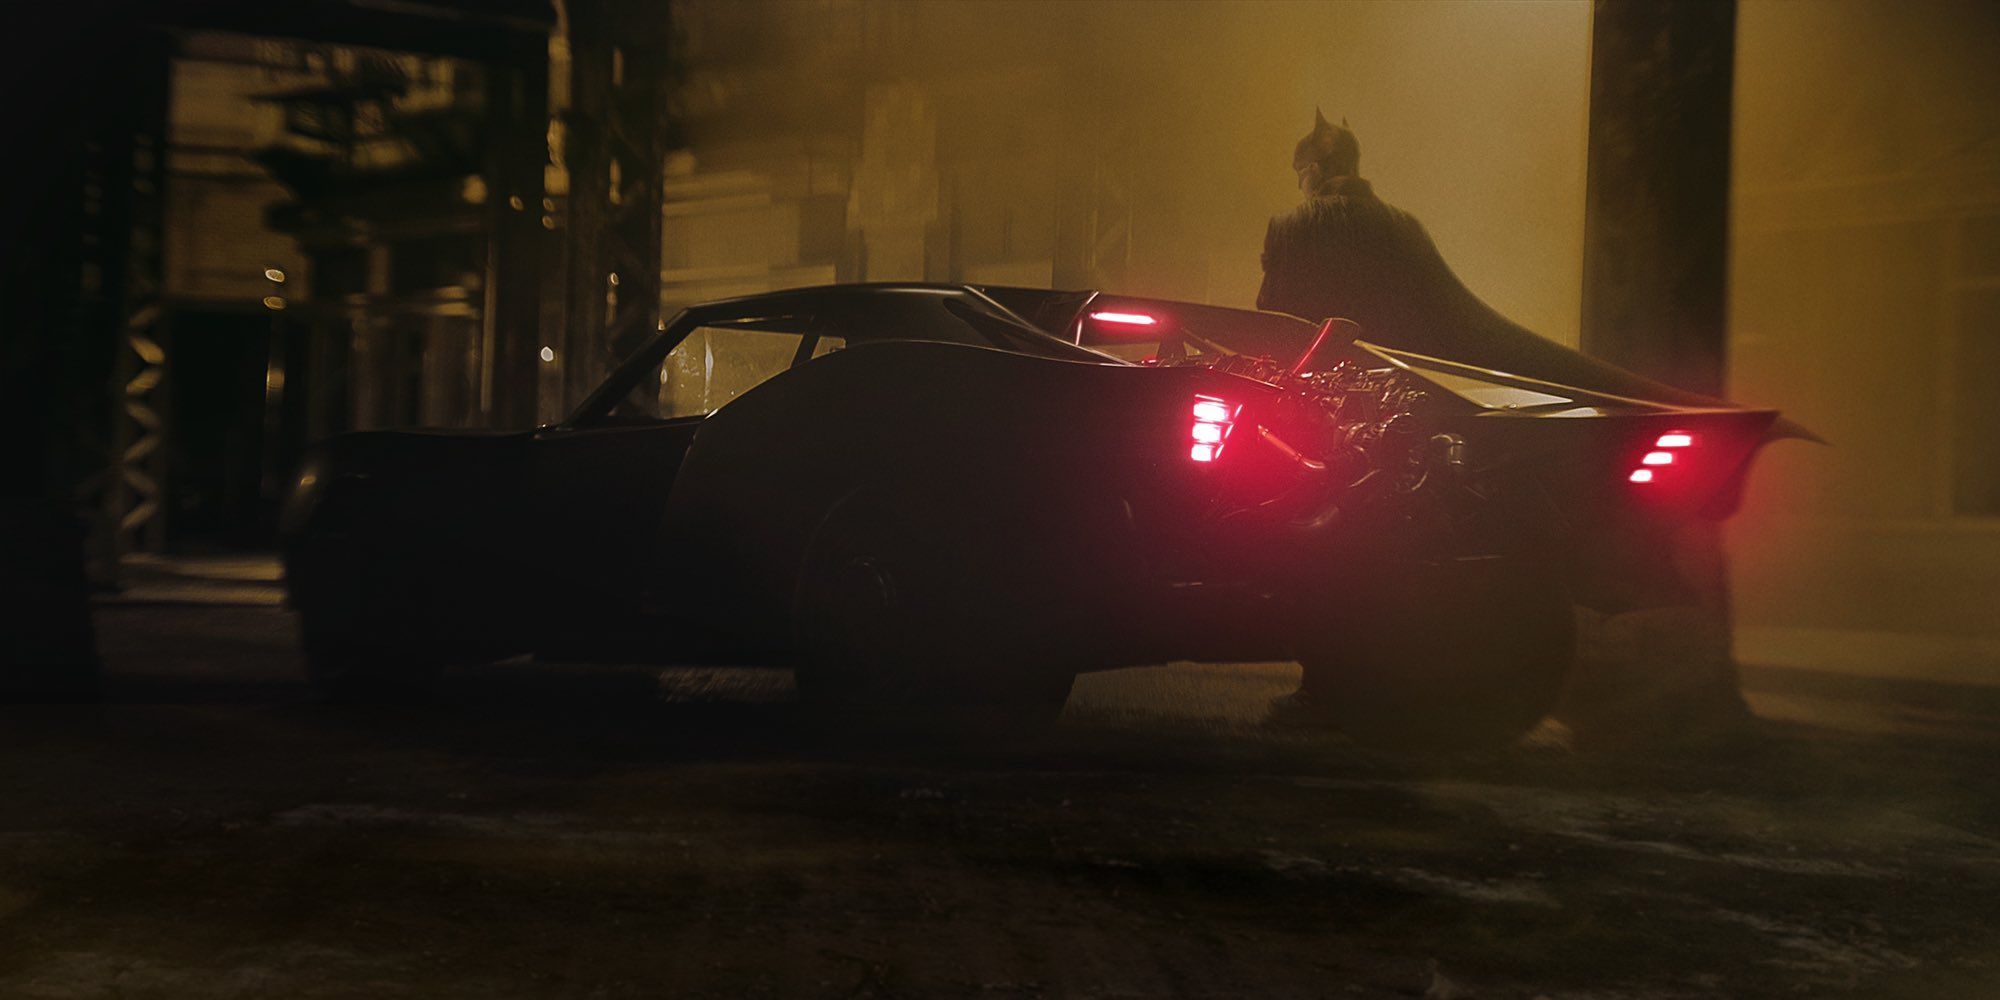 The rear of the new Batmobile